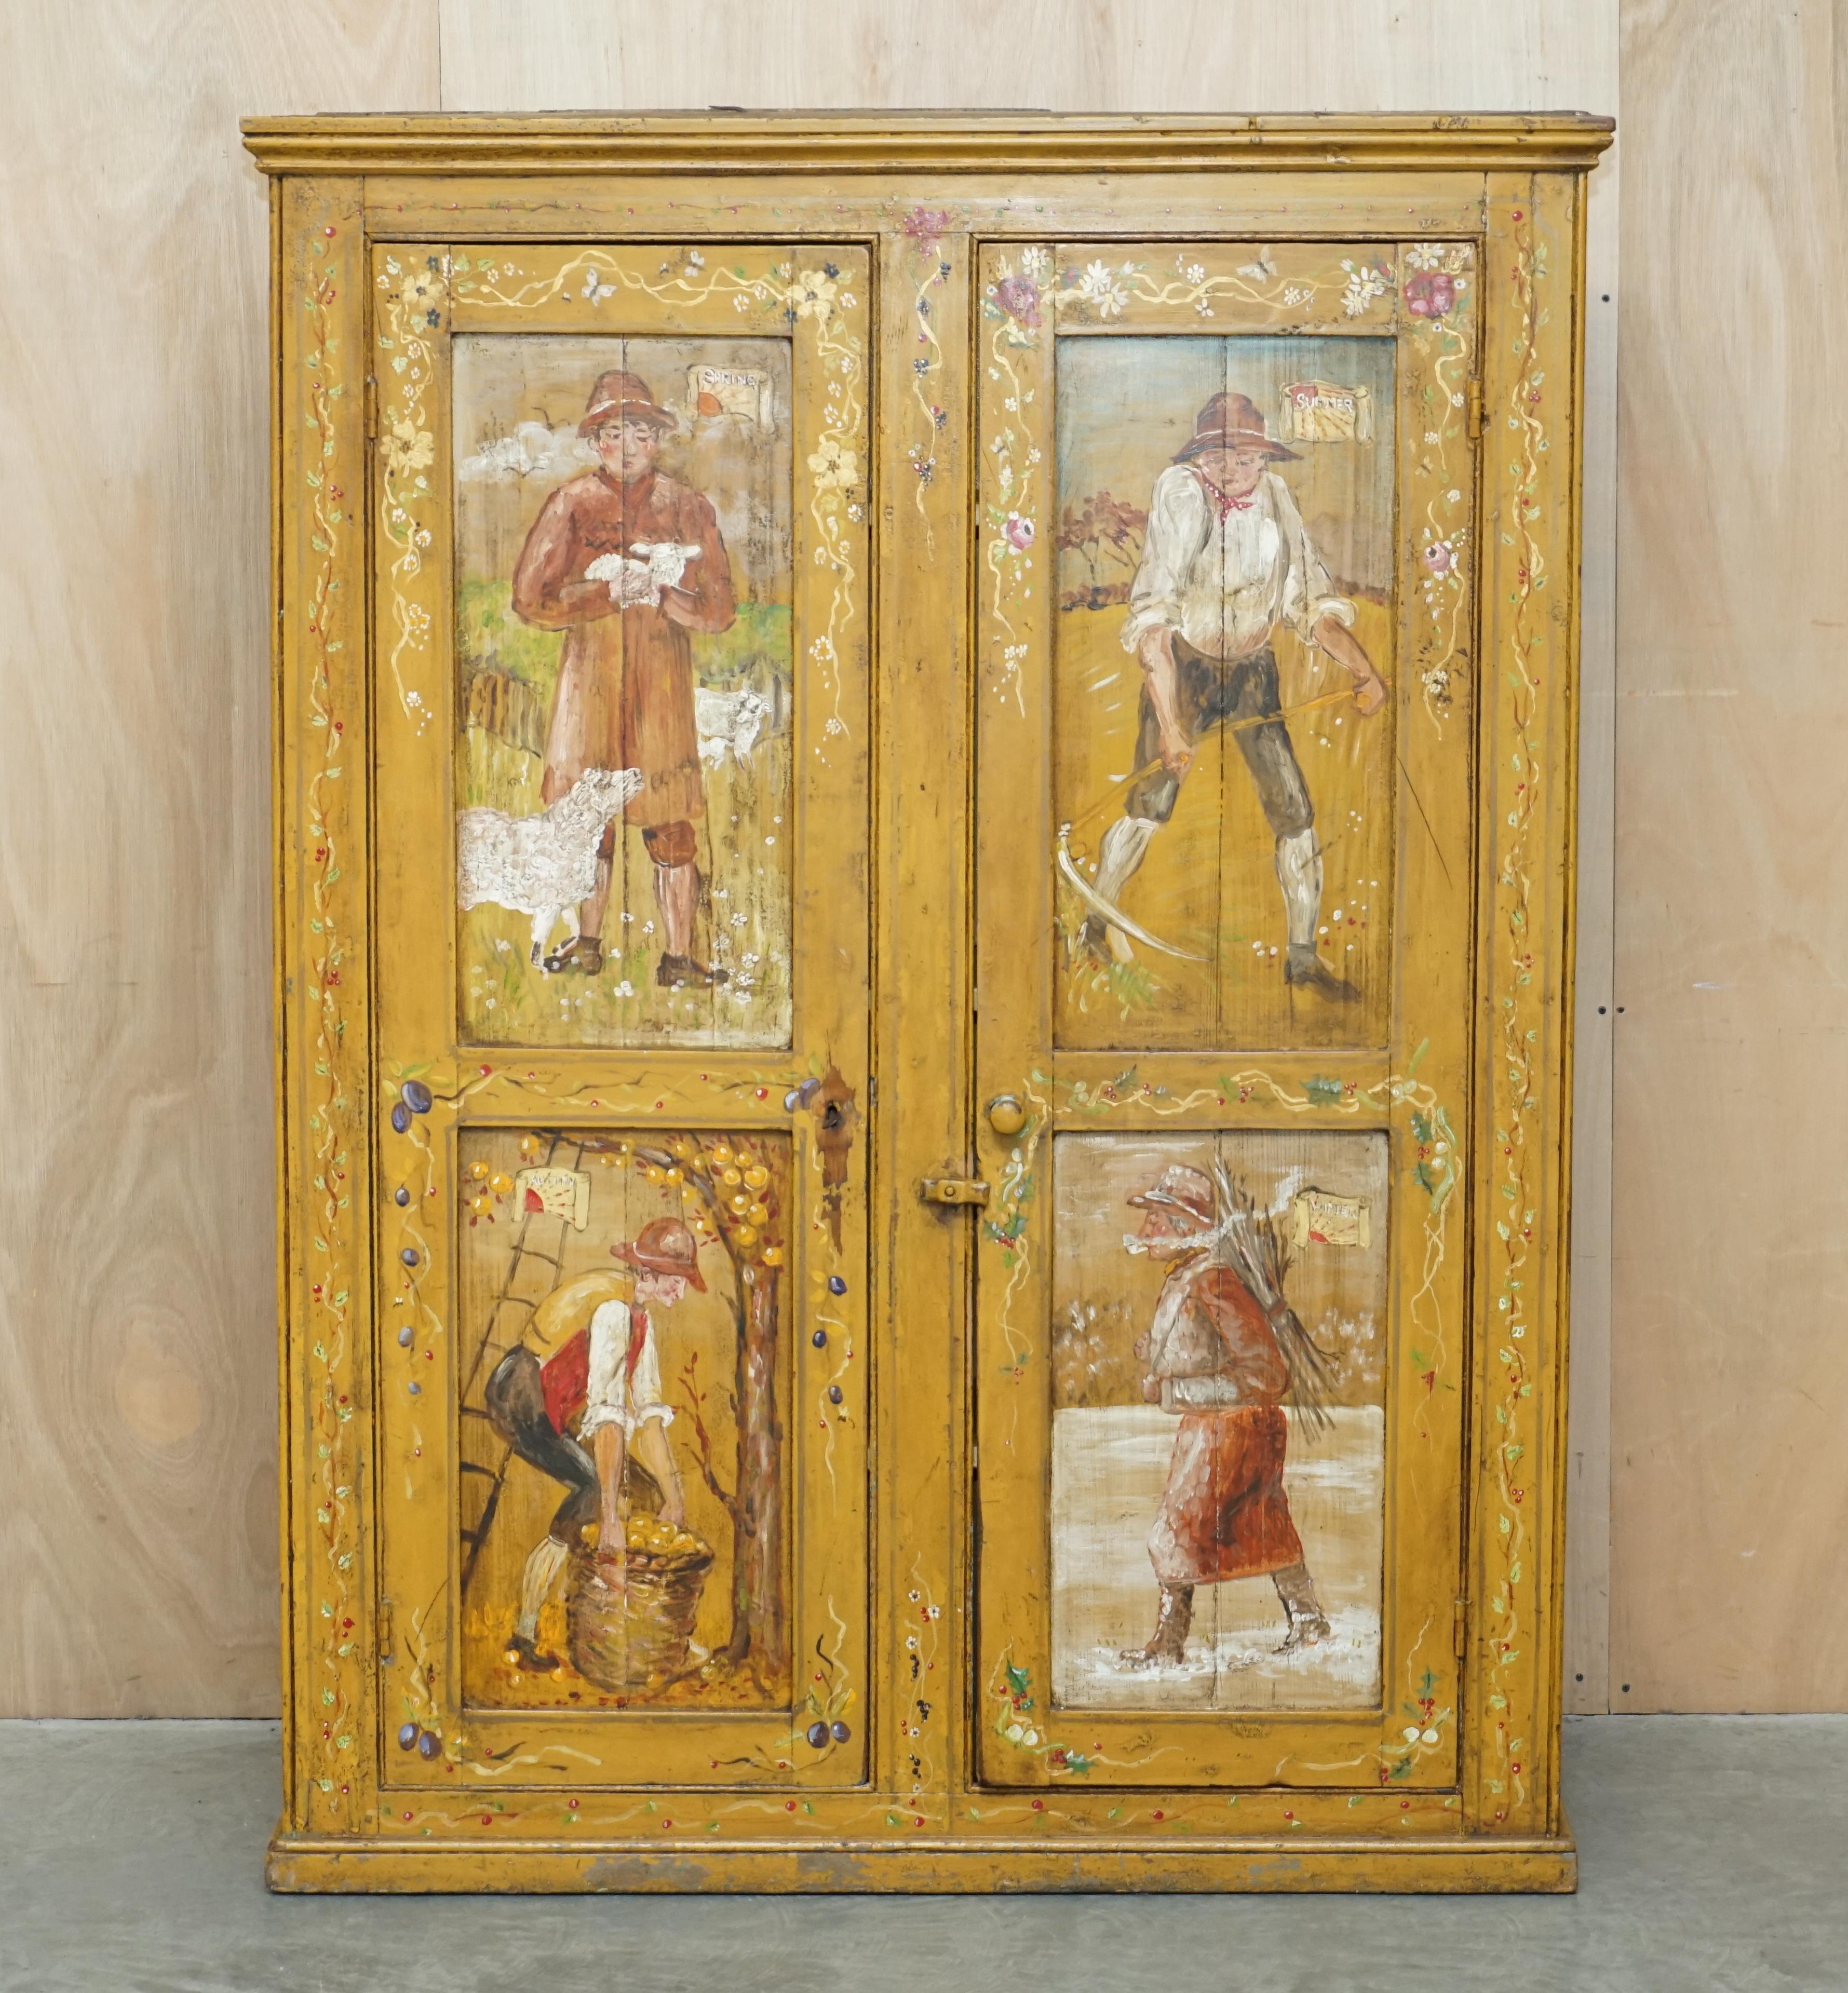 We are delighted to offer for sale this stunning highly collectable hand painted Antique French Victorian pine Housekeepers pot cupboard or bookcase

Please note the delivery fee listed is just a guide, it covers within the M25 only for the UK and